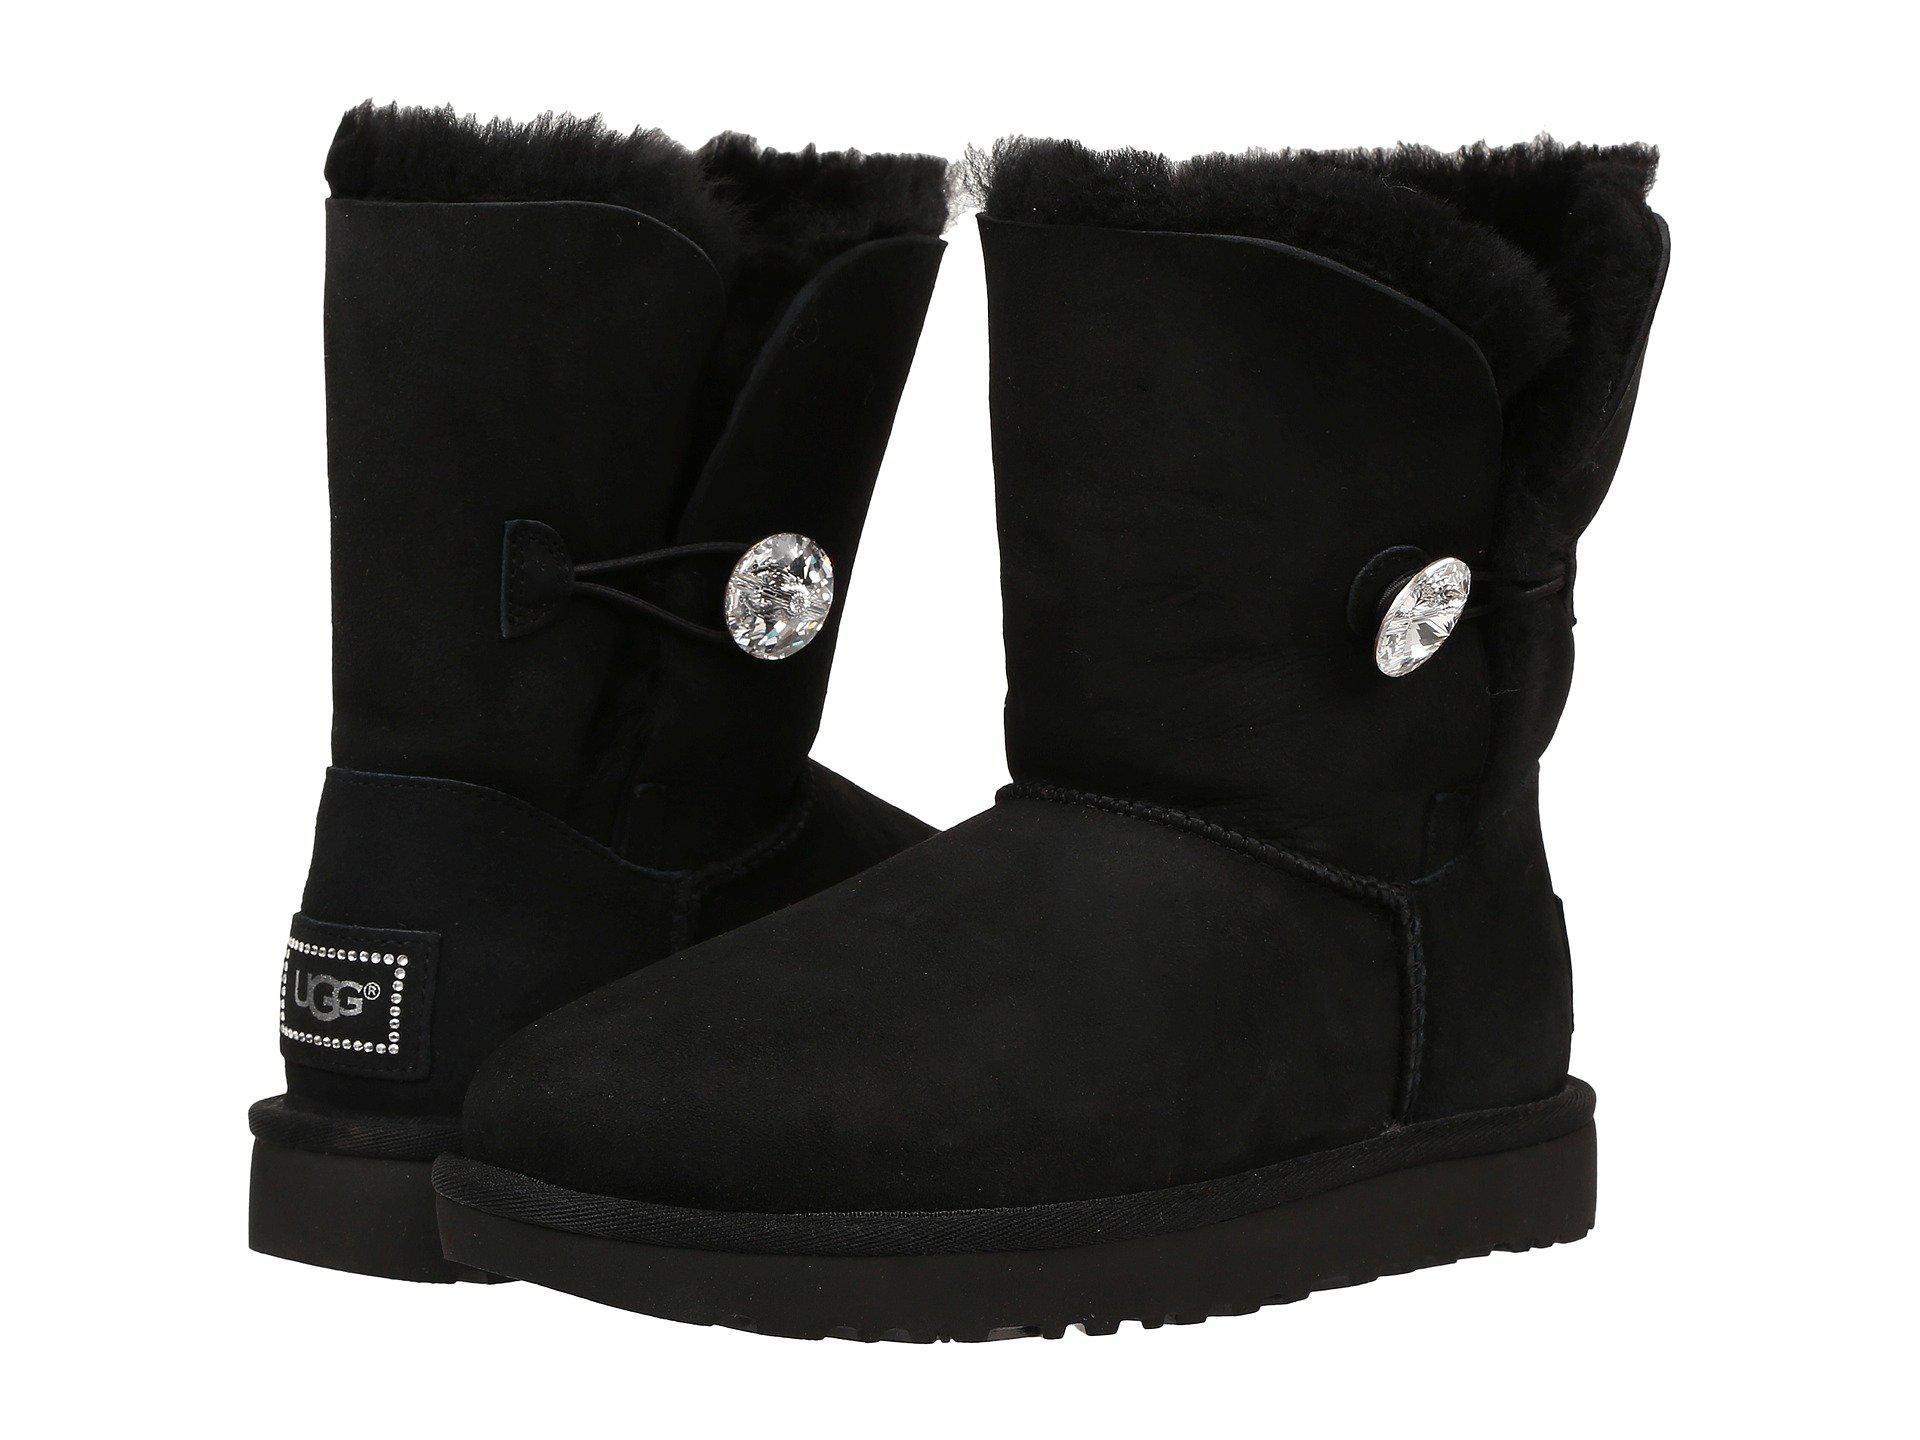 Lyst - Ugg Bailey Button Bling in Black